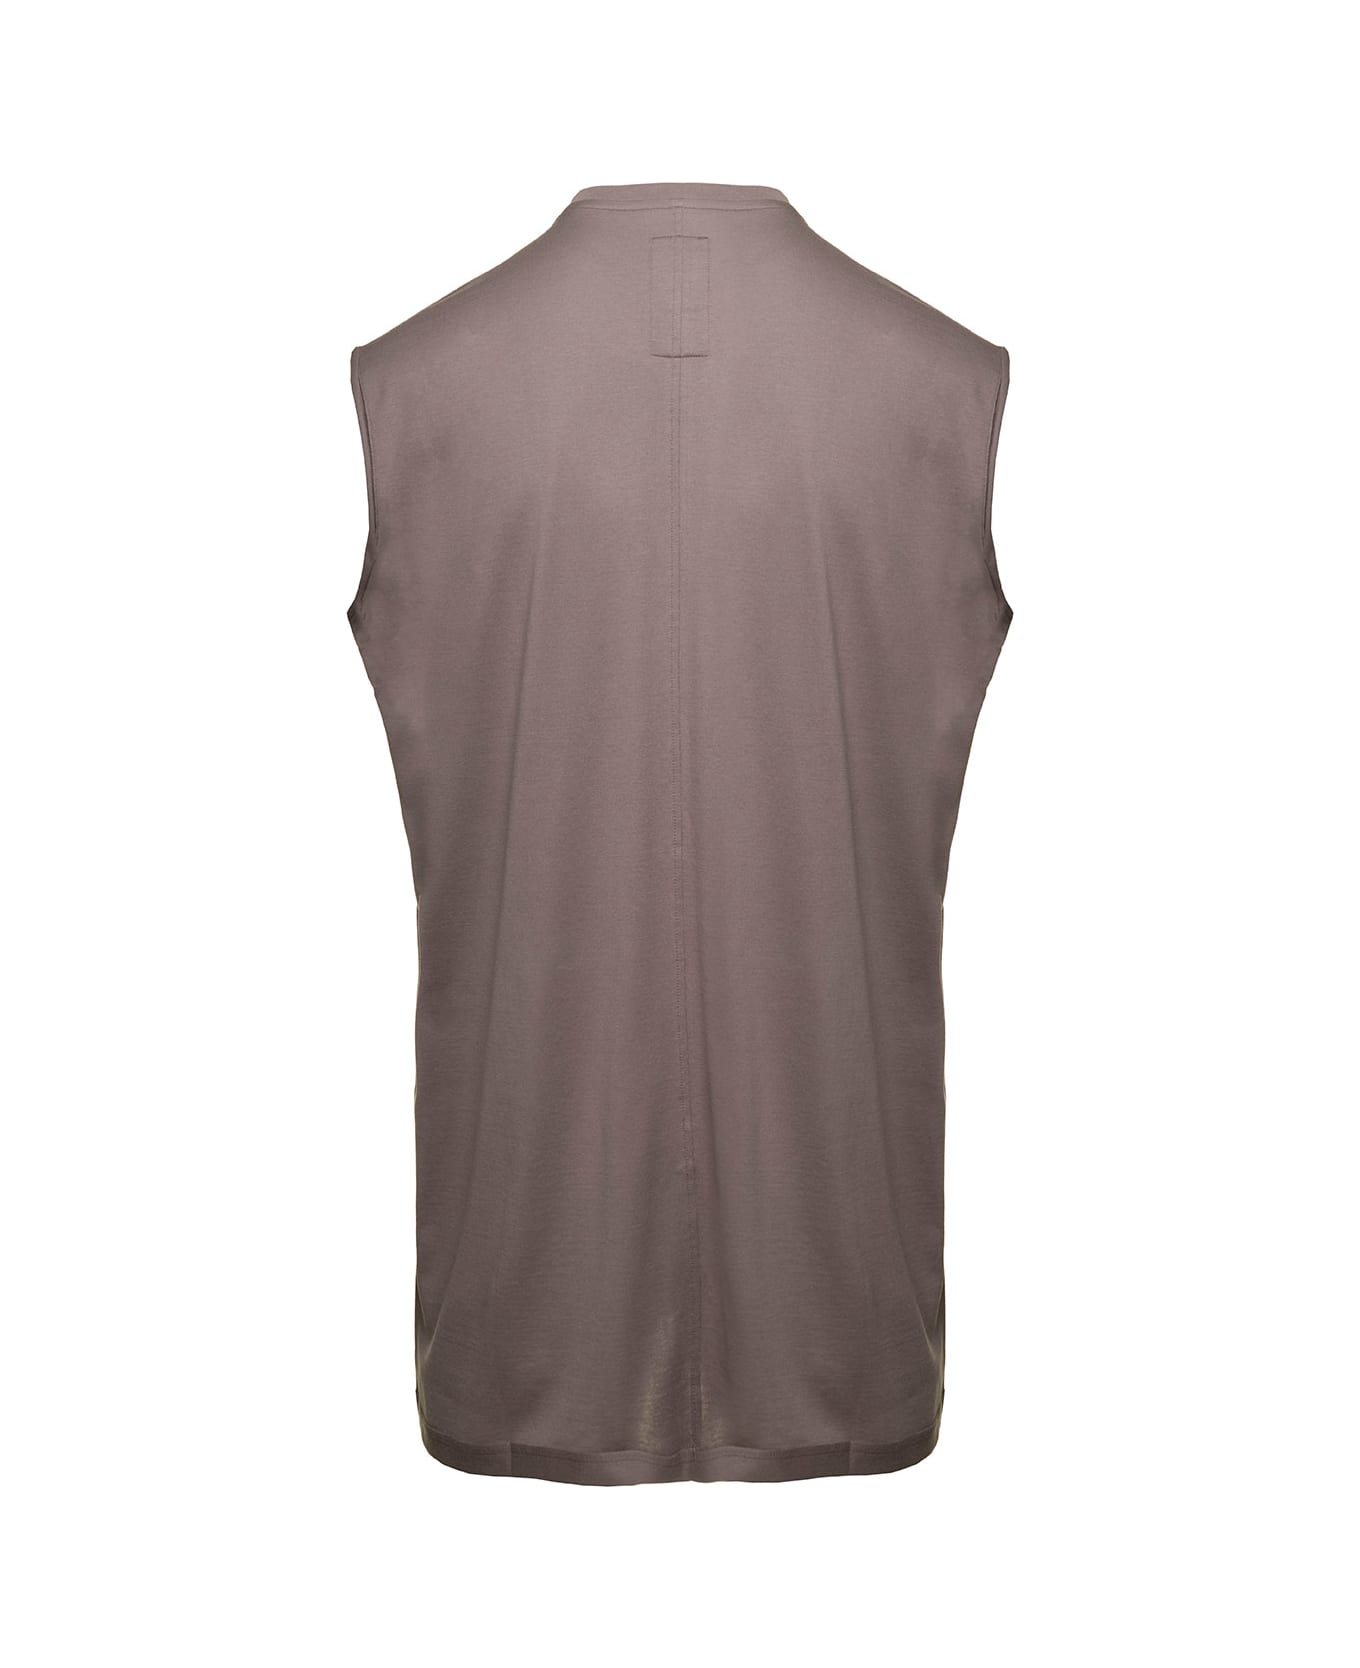 Rick Owens x Champion 'tarp T' Grey Sleeveless Top With Small Pentagram Embroidery In Cotton Man - DUST タンクトップ